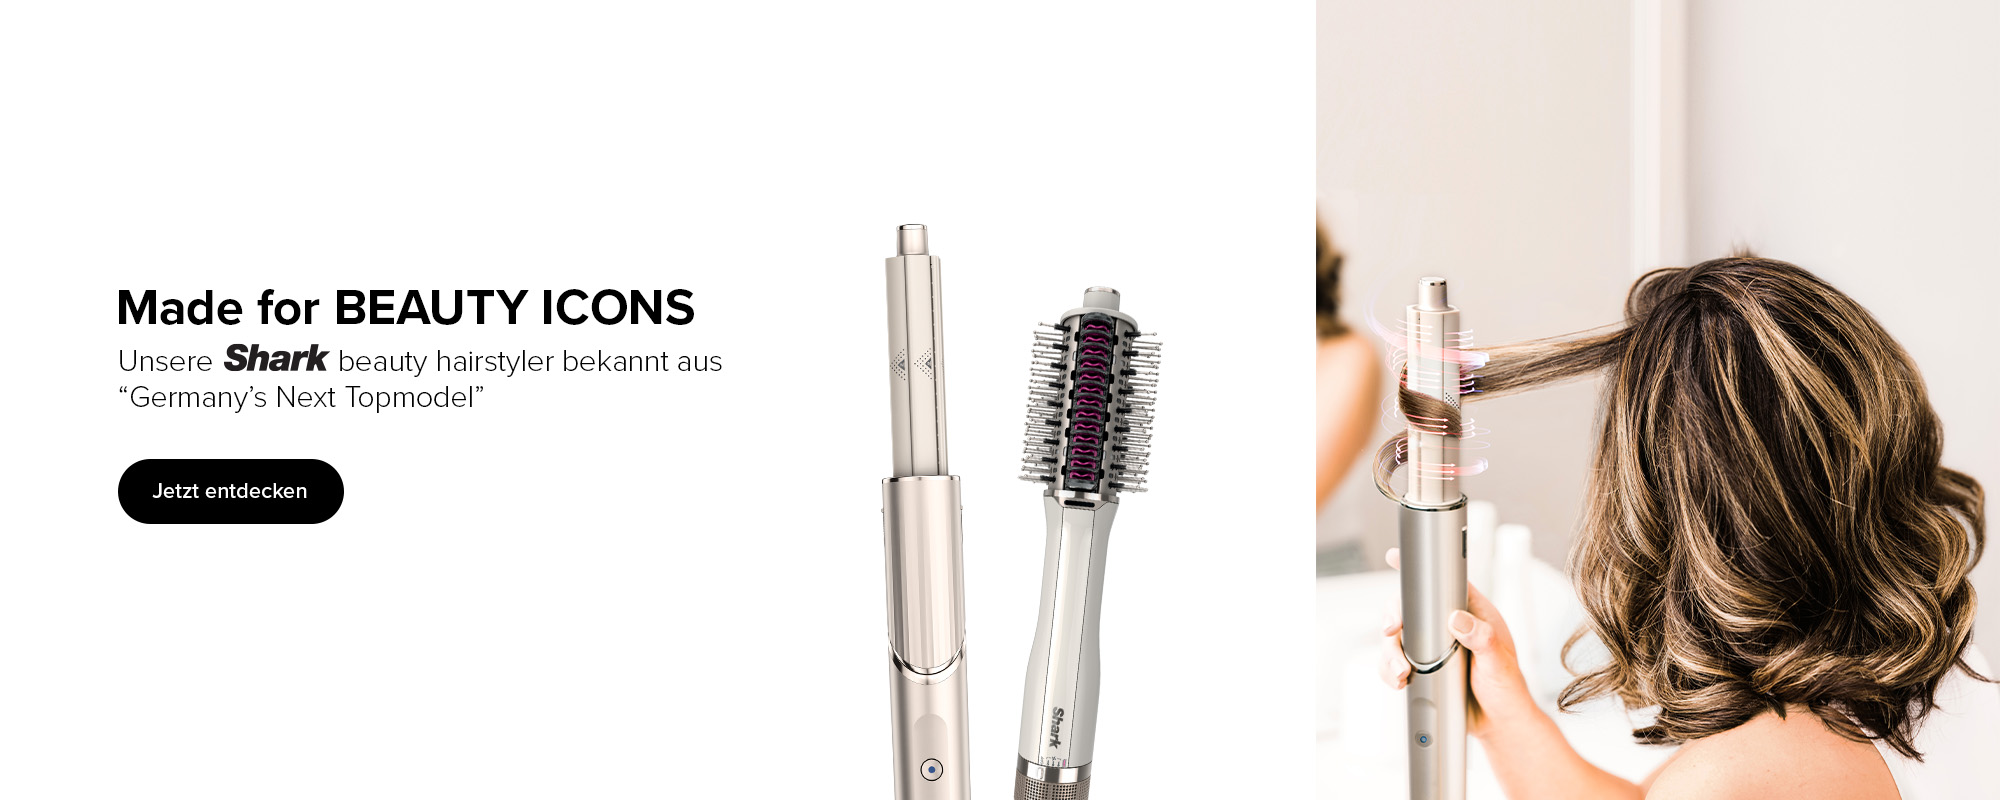 Made for Beauty ICONS - Unsere SHARK Beauty hairstyler bekannt aus "Germany's Next Topmodel"